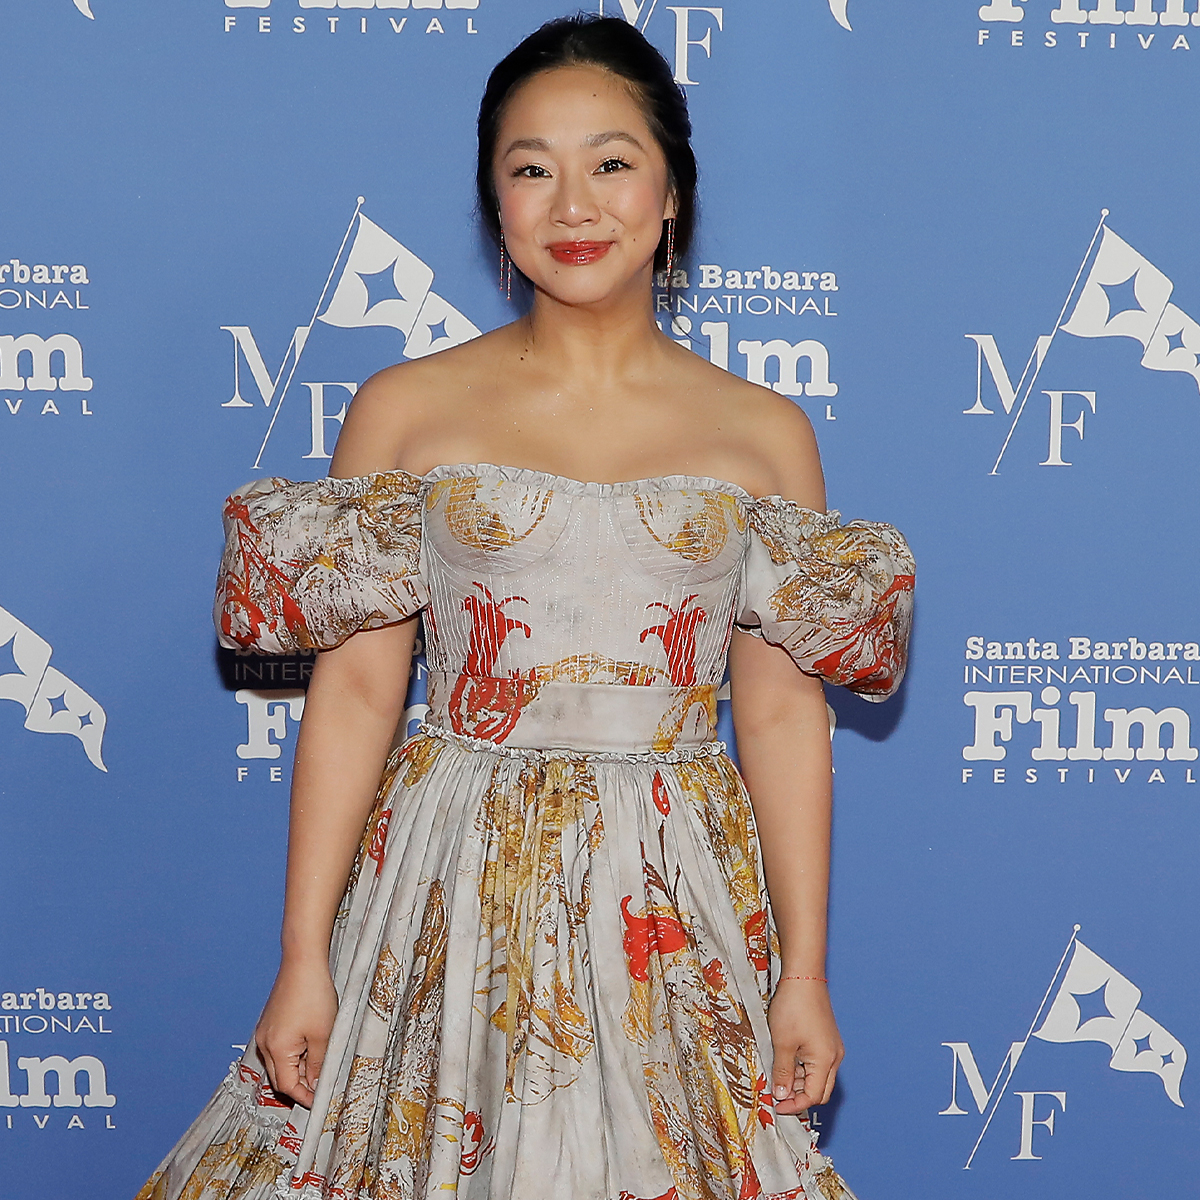 Everything Everywhere Star Stephanie Hsu Details the “High Highs” and “Low Lows” of Award Season – E! Online